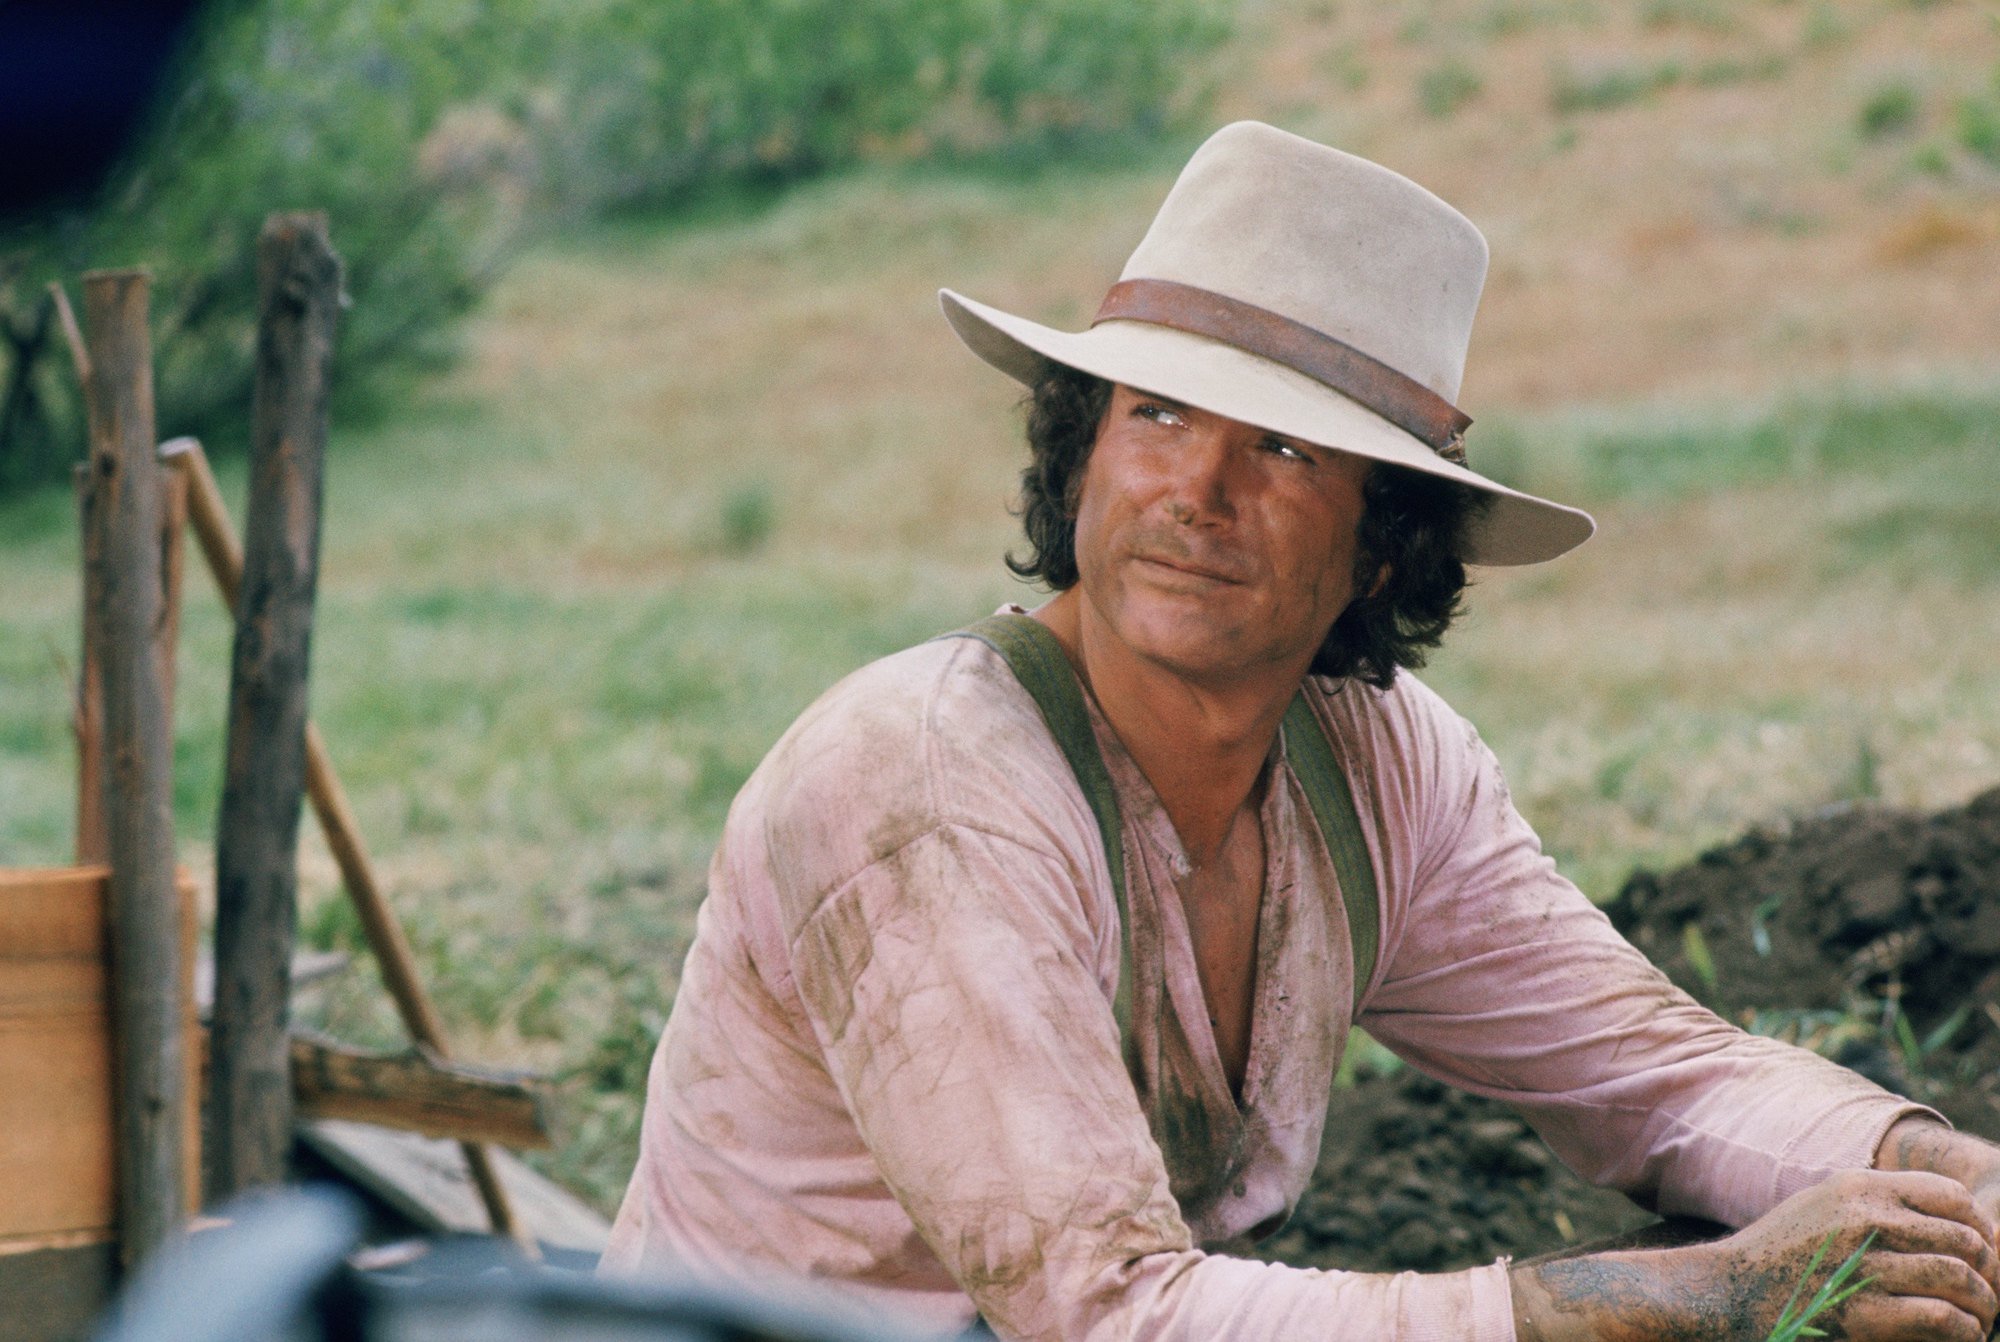 Michael Landon with dirt on his face and shirt